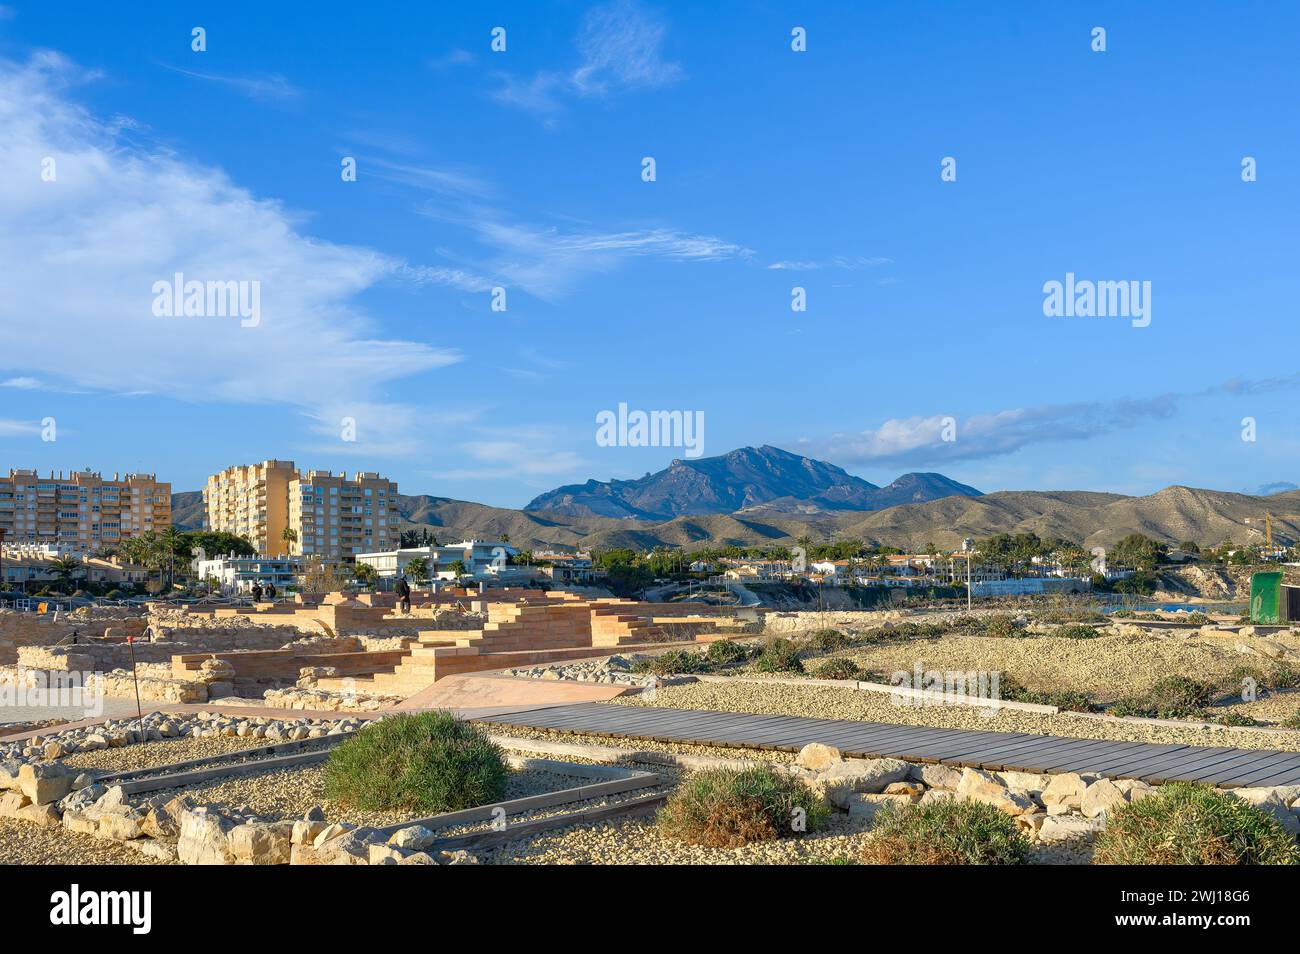 Mountain scenery and city buildings are framed by the La Illeta archeological site. Stock Photo